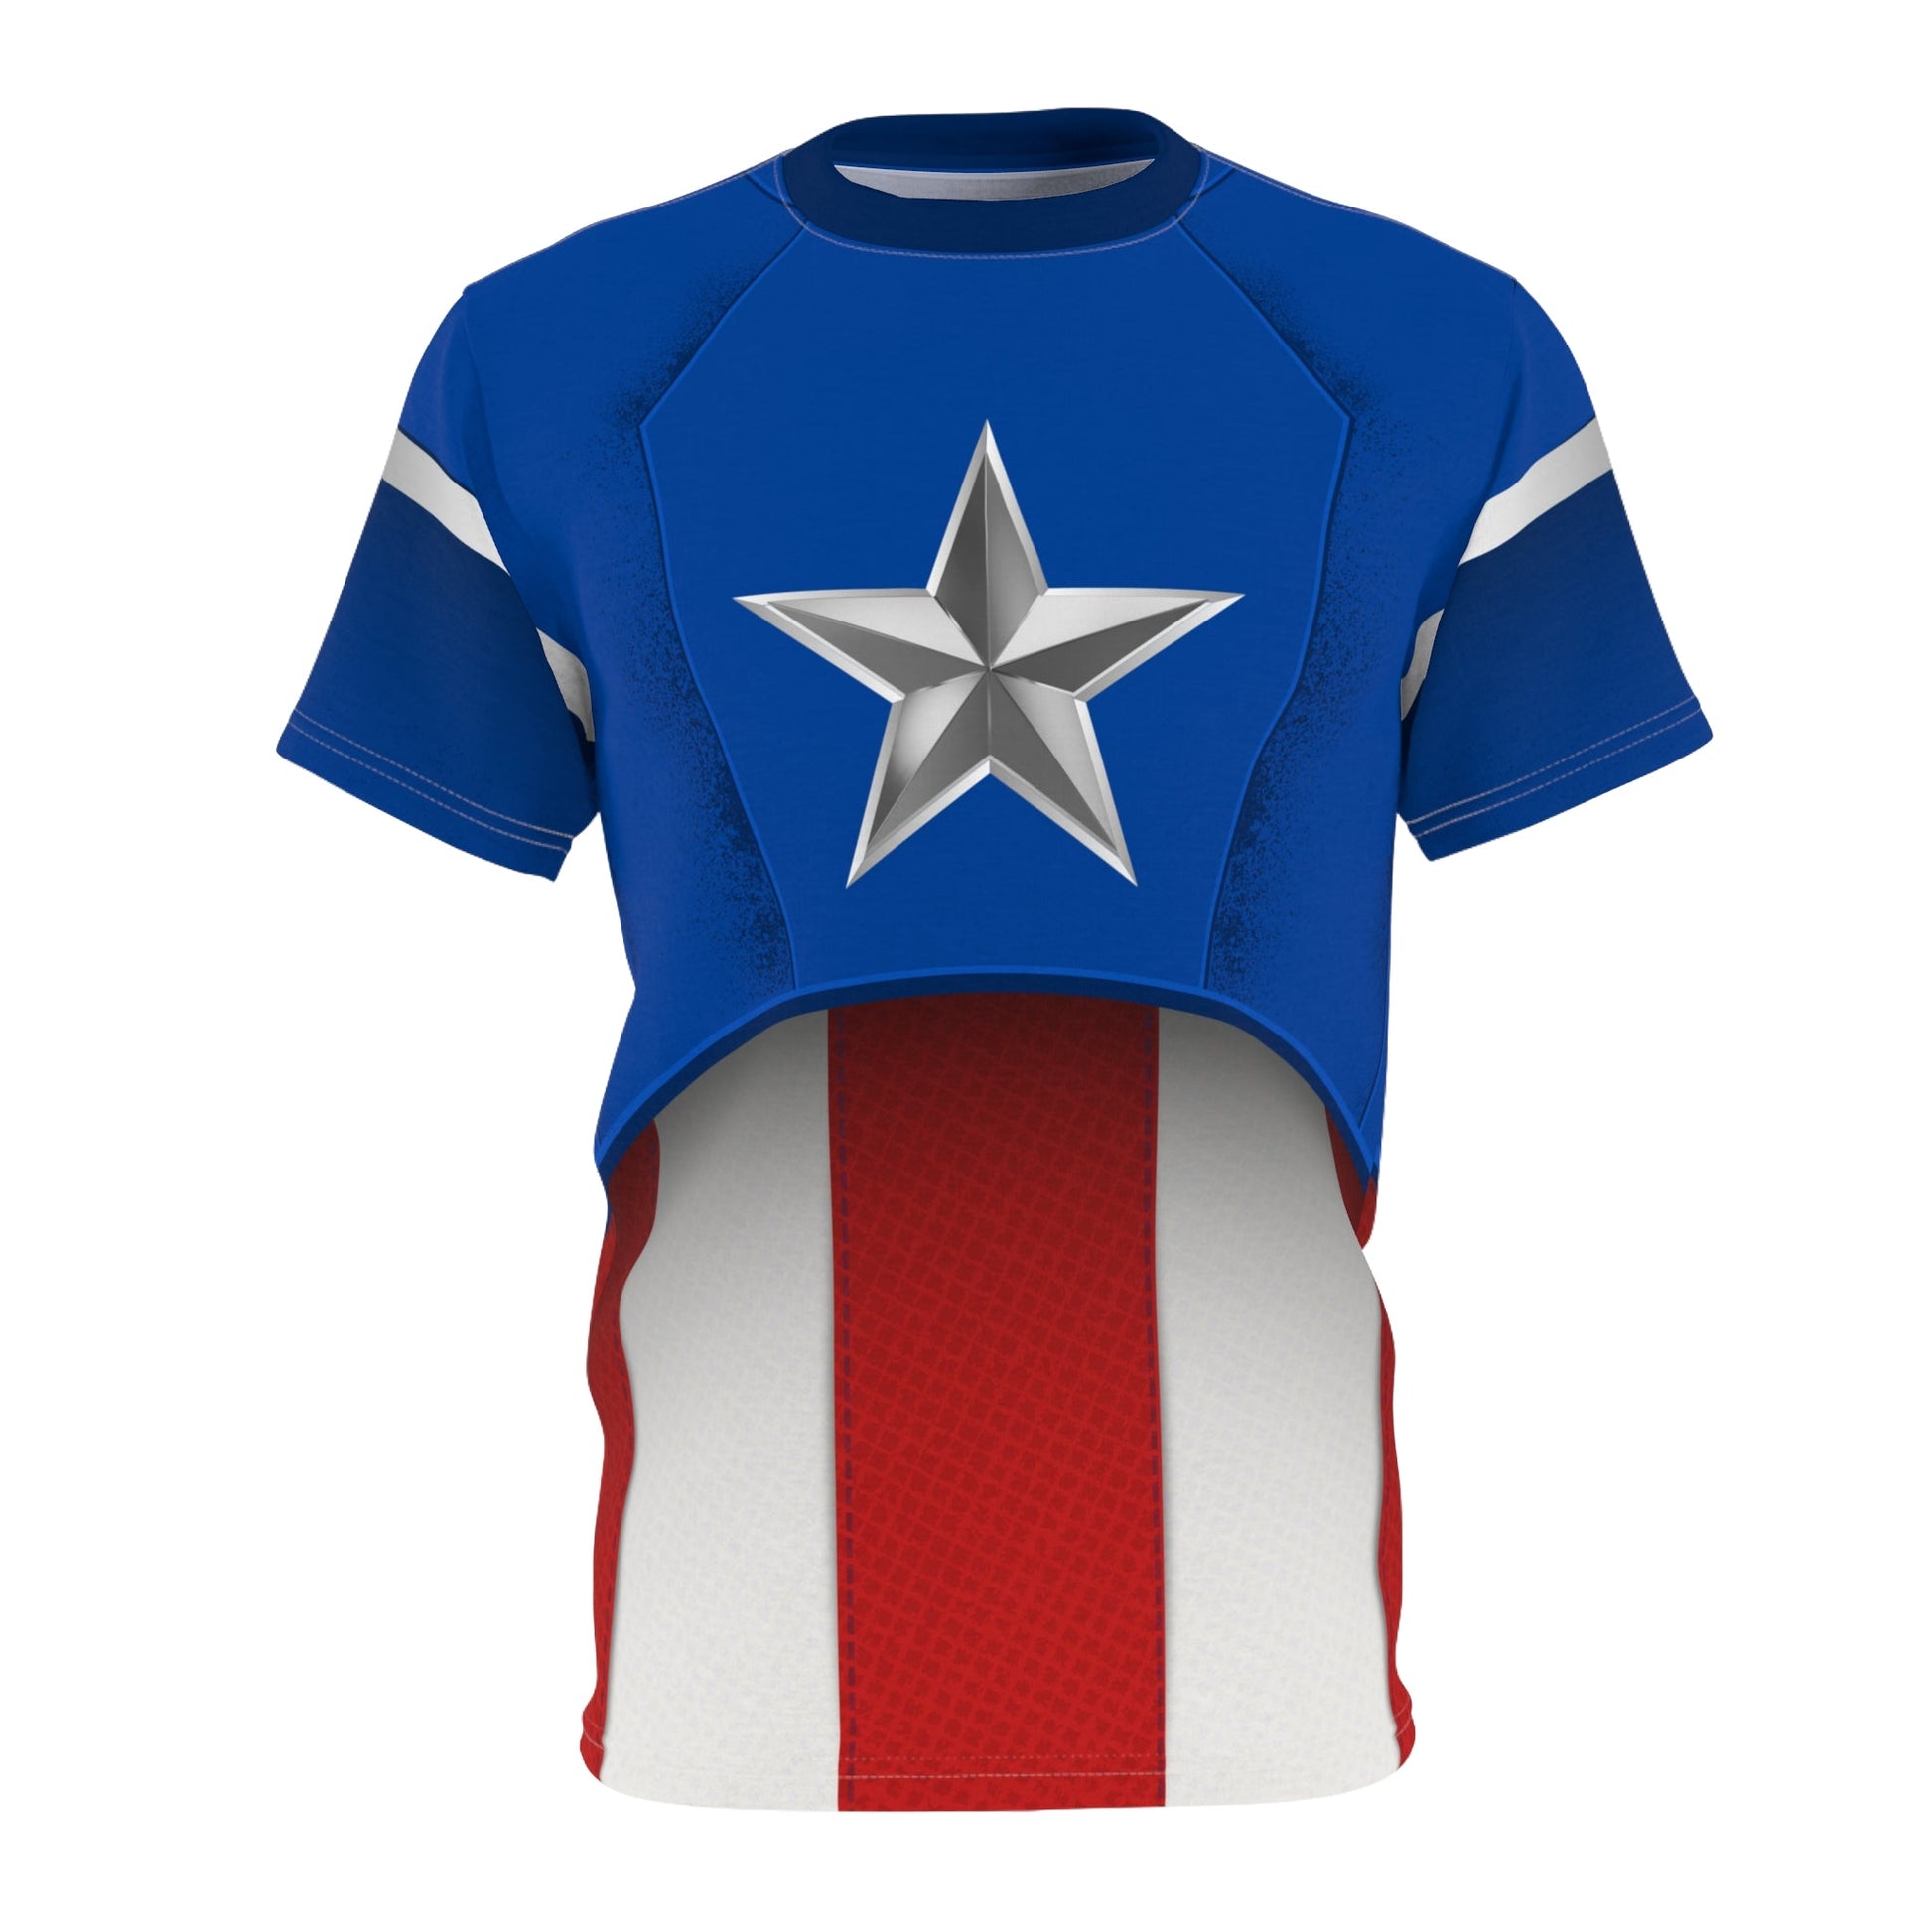 The Captain Unisex Tee All Over PrintAOP ClothingAssembled in the USA#tag4##tag5##tag6#